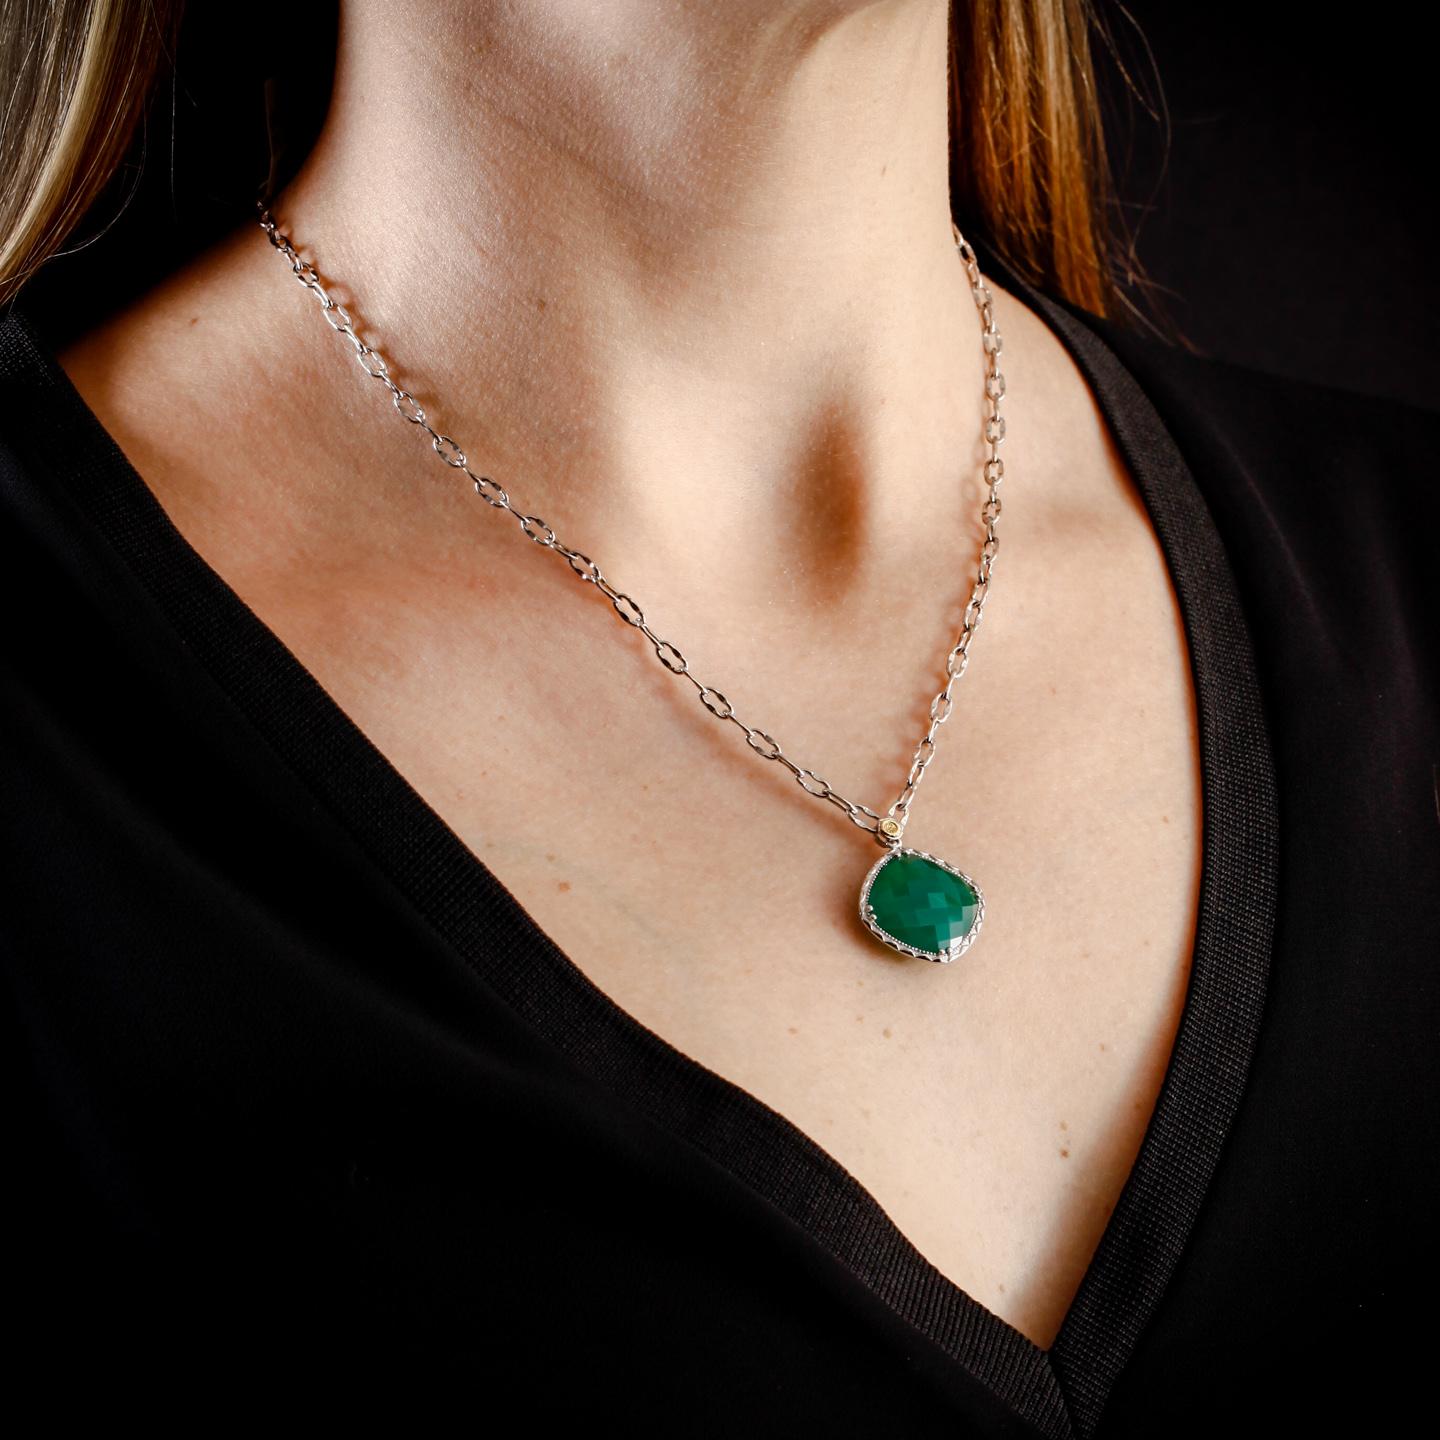 This Tacori Silver necklace is set with a 20x20mm cushion-shaped green onyx stone. The Tacori stamp featured on the bale is 18k yellow gold. The silver Tacori chain is 18 inches long. This necklace is in perfect condition and has never been worn.